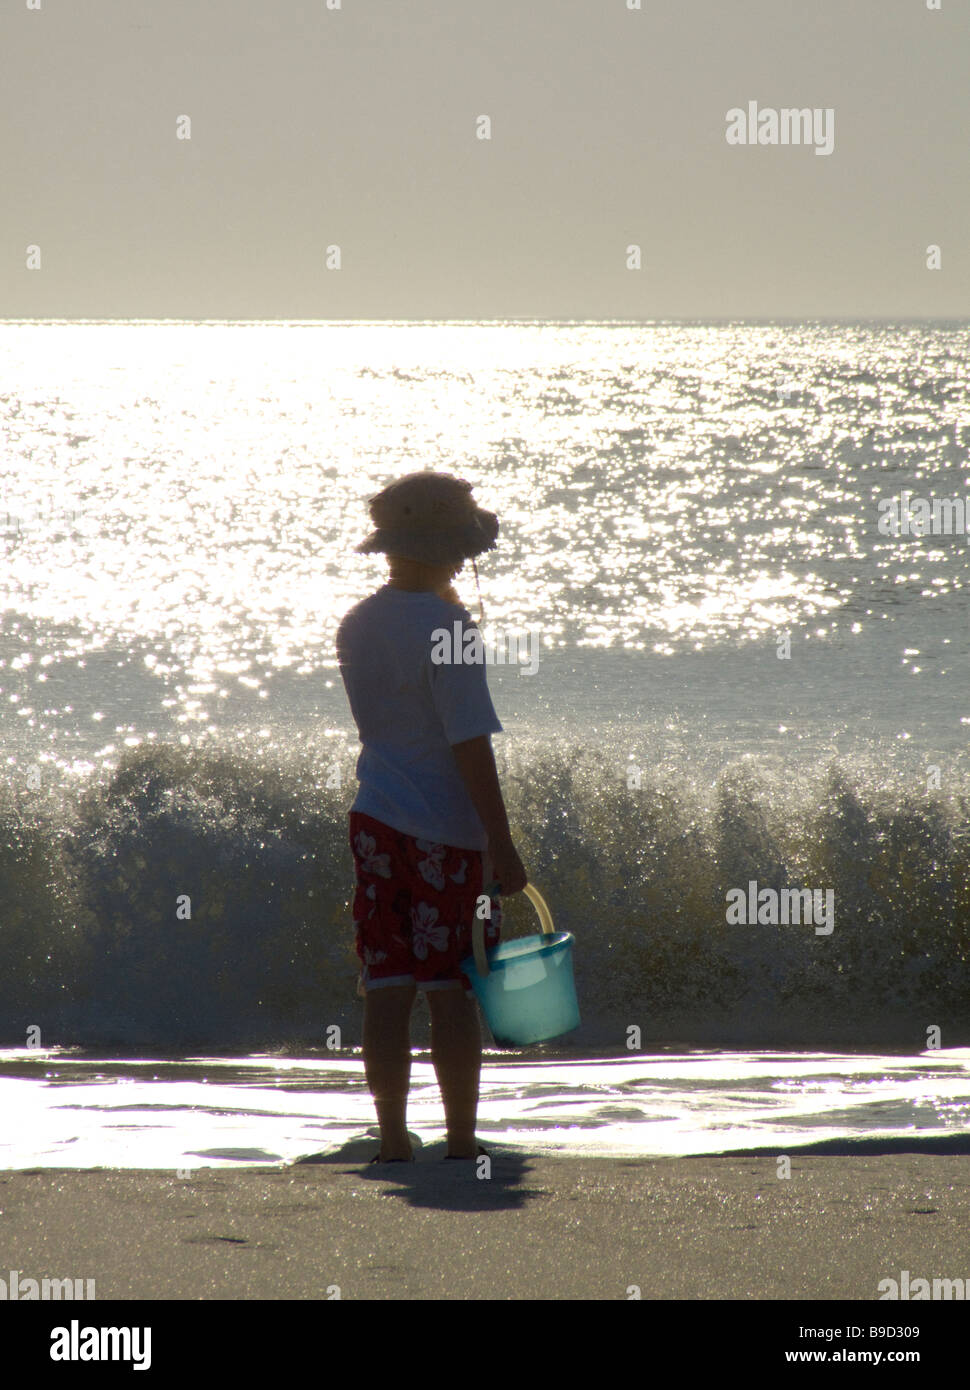 boy on beach with bucked playing near ocean waves Stock Photo